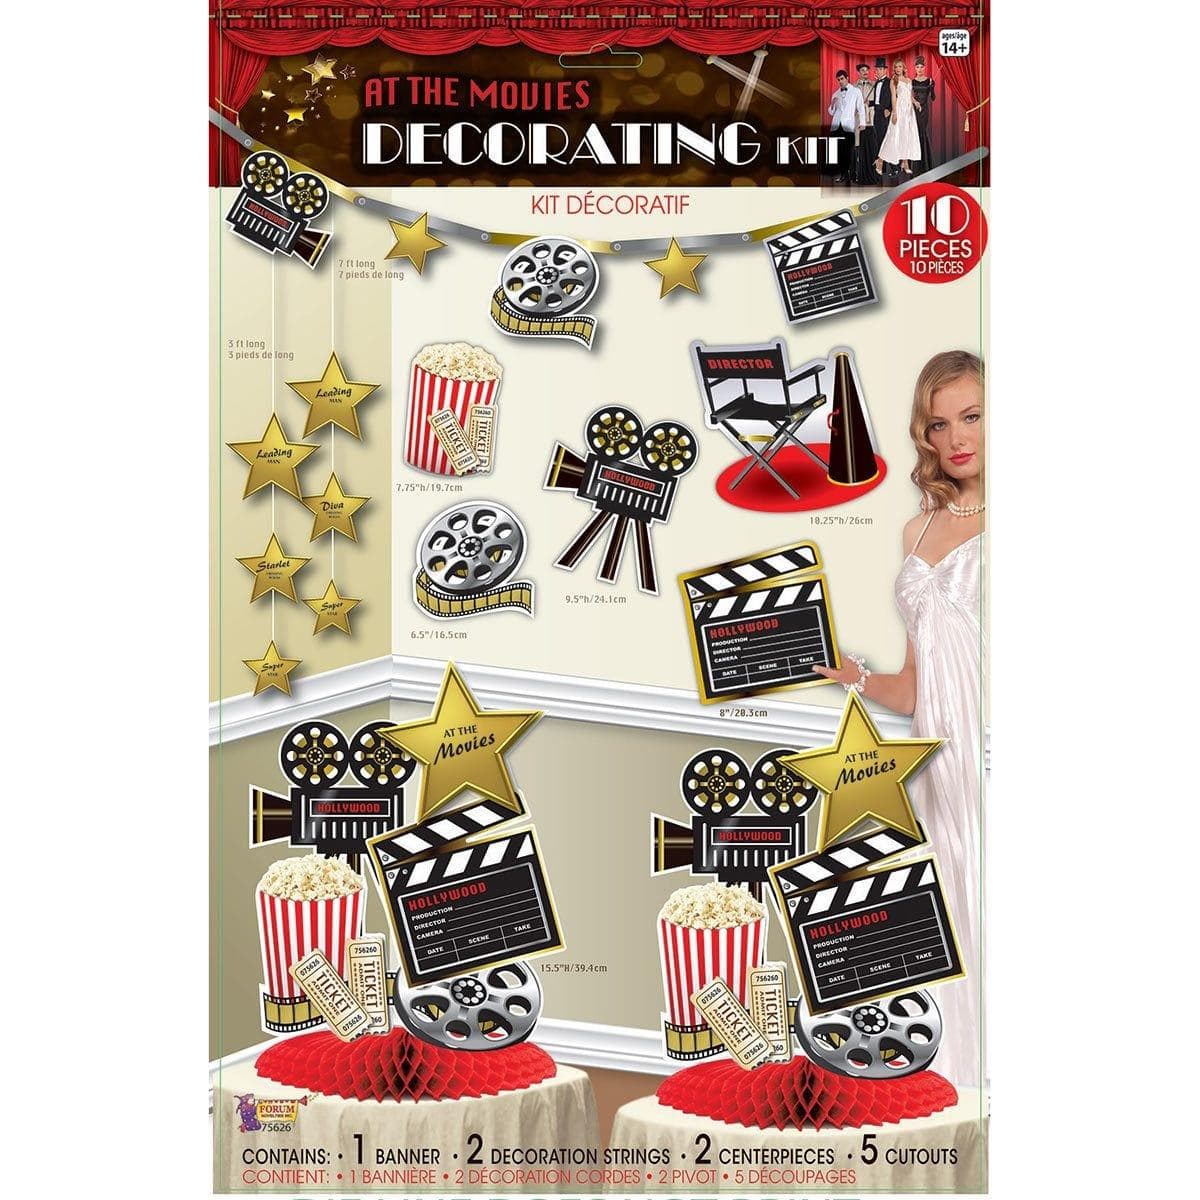 Buy Theme Party At The Movies Decorating Kit sold at Party Expert